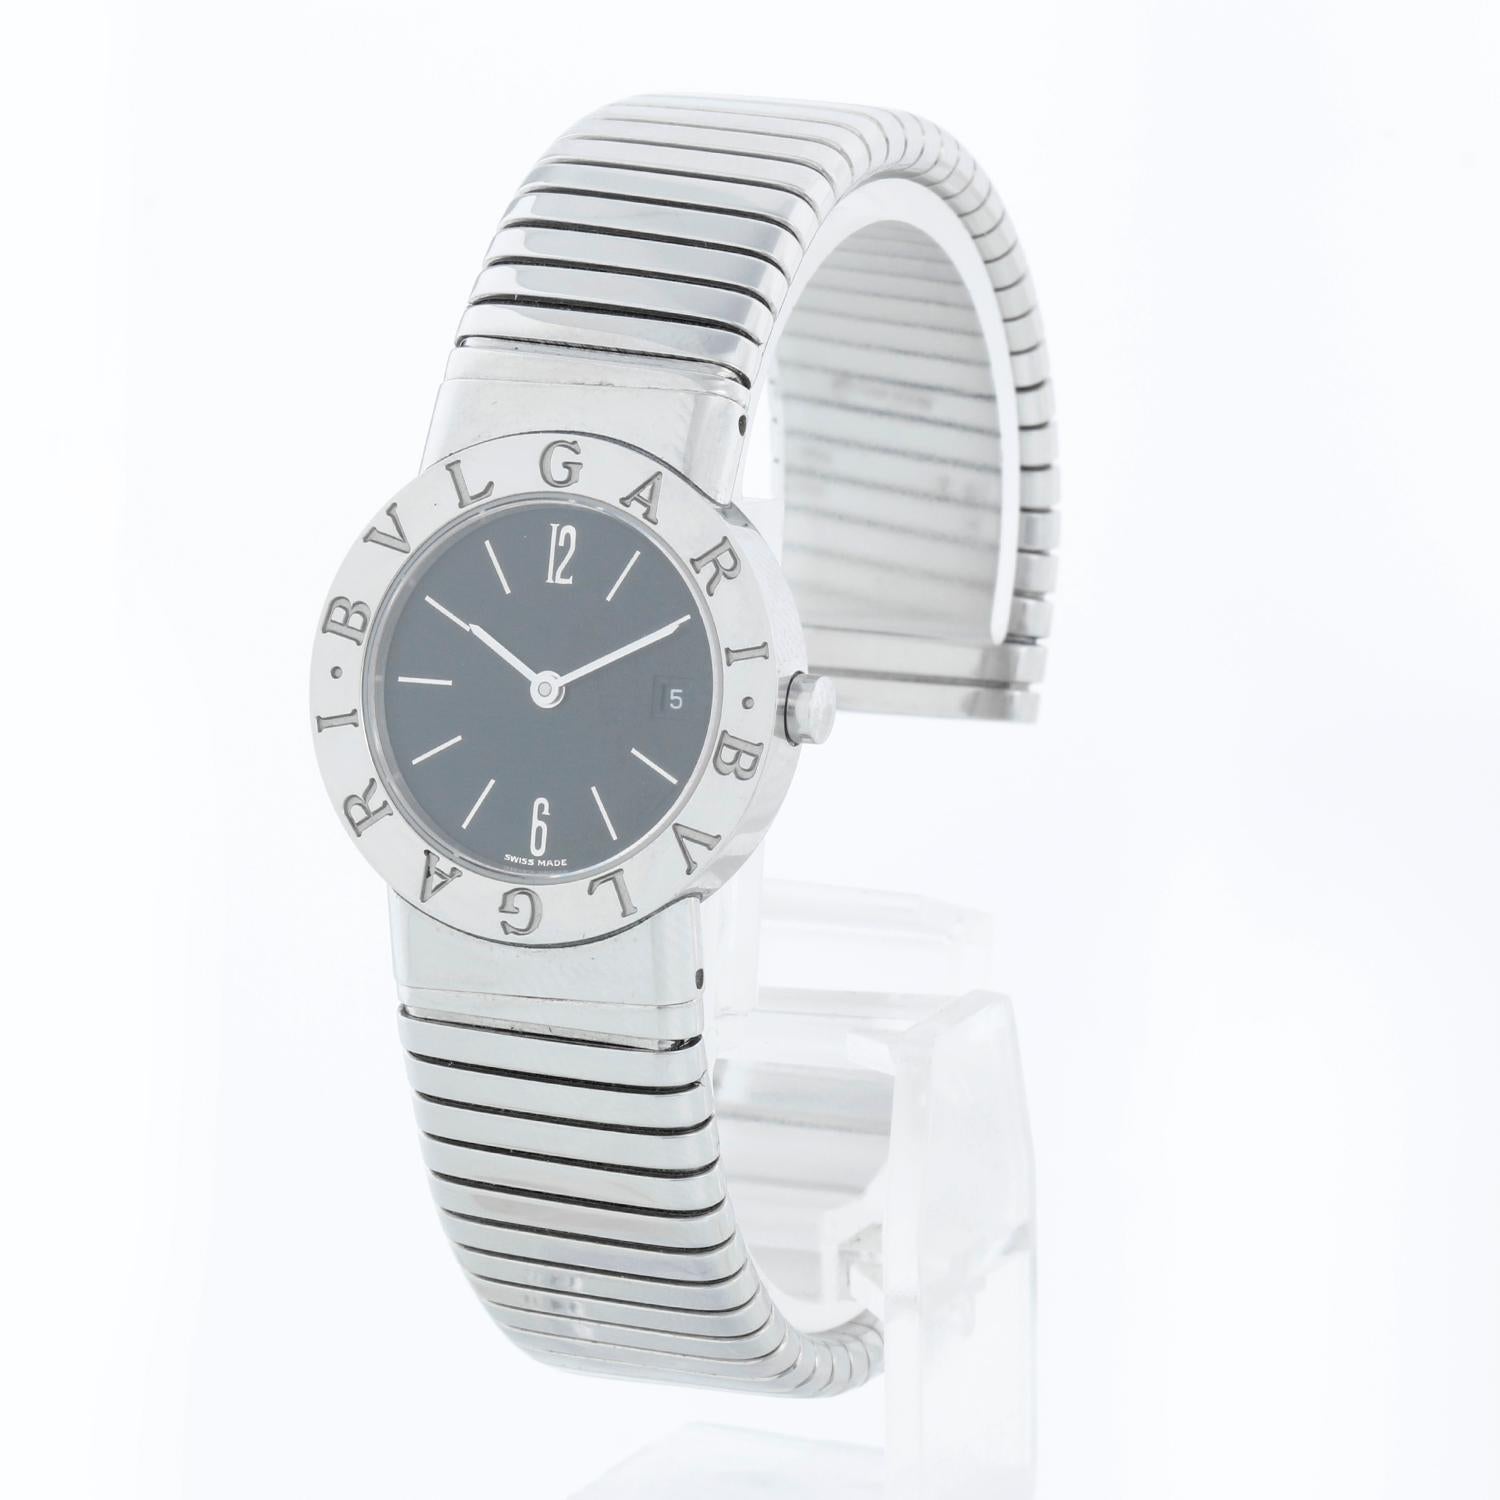 Bulgari Tubogas Ladies Stainless Steel Quartz Watch BB 26 2TS In Excellent Condition For Sale In Dallas, TX